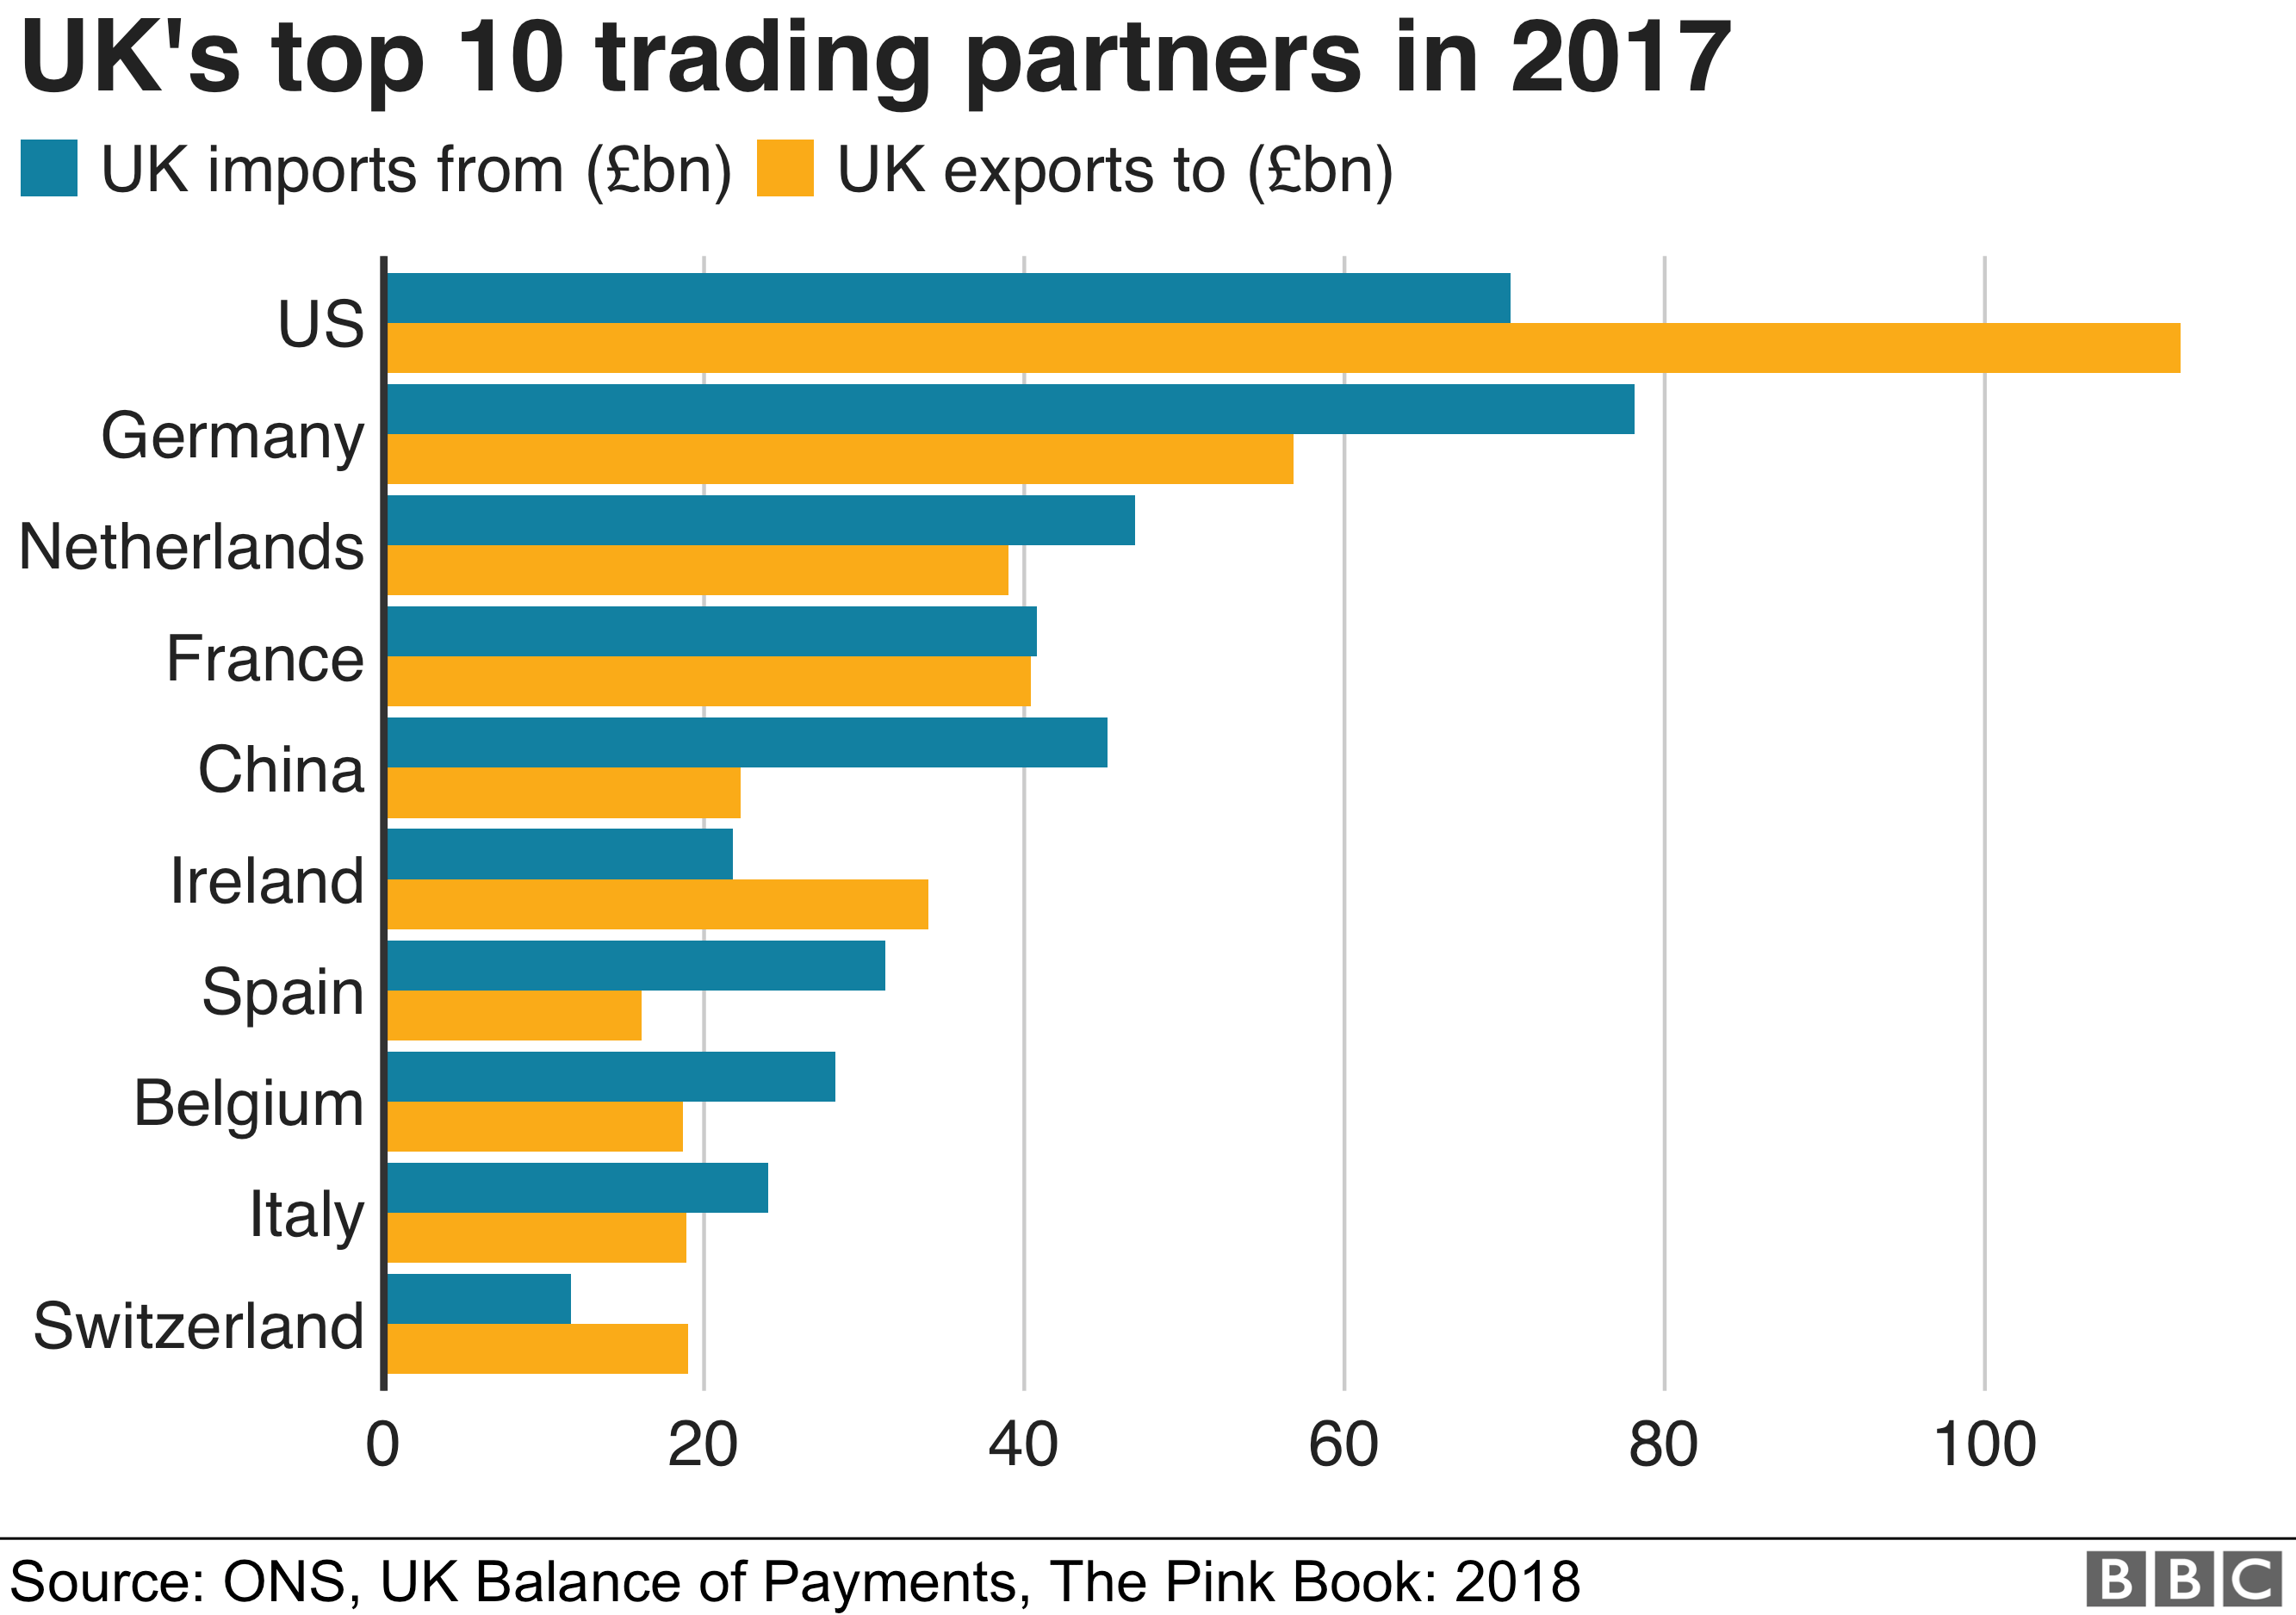 Chart showing the UK's top trading partners